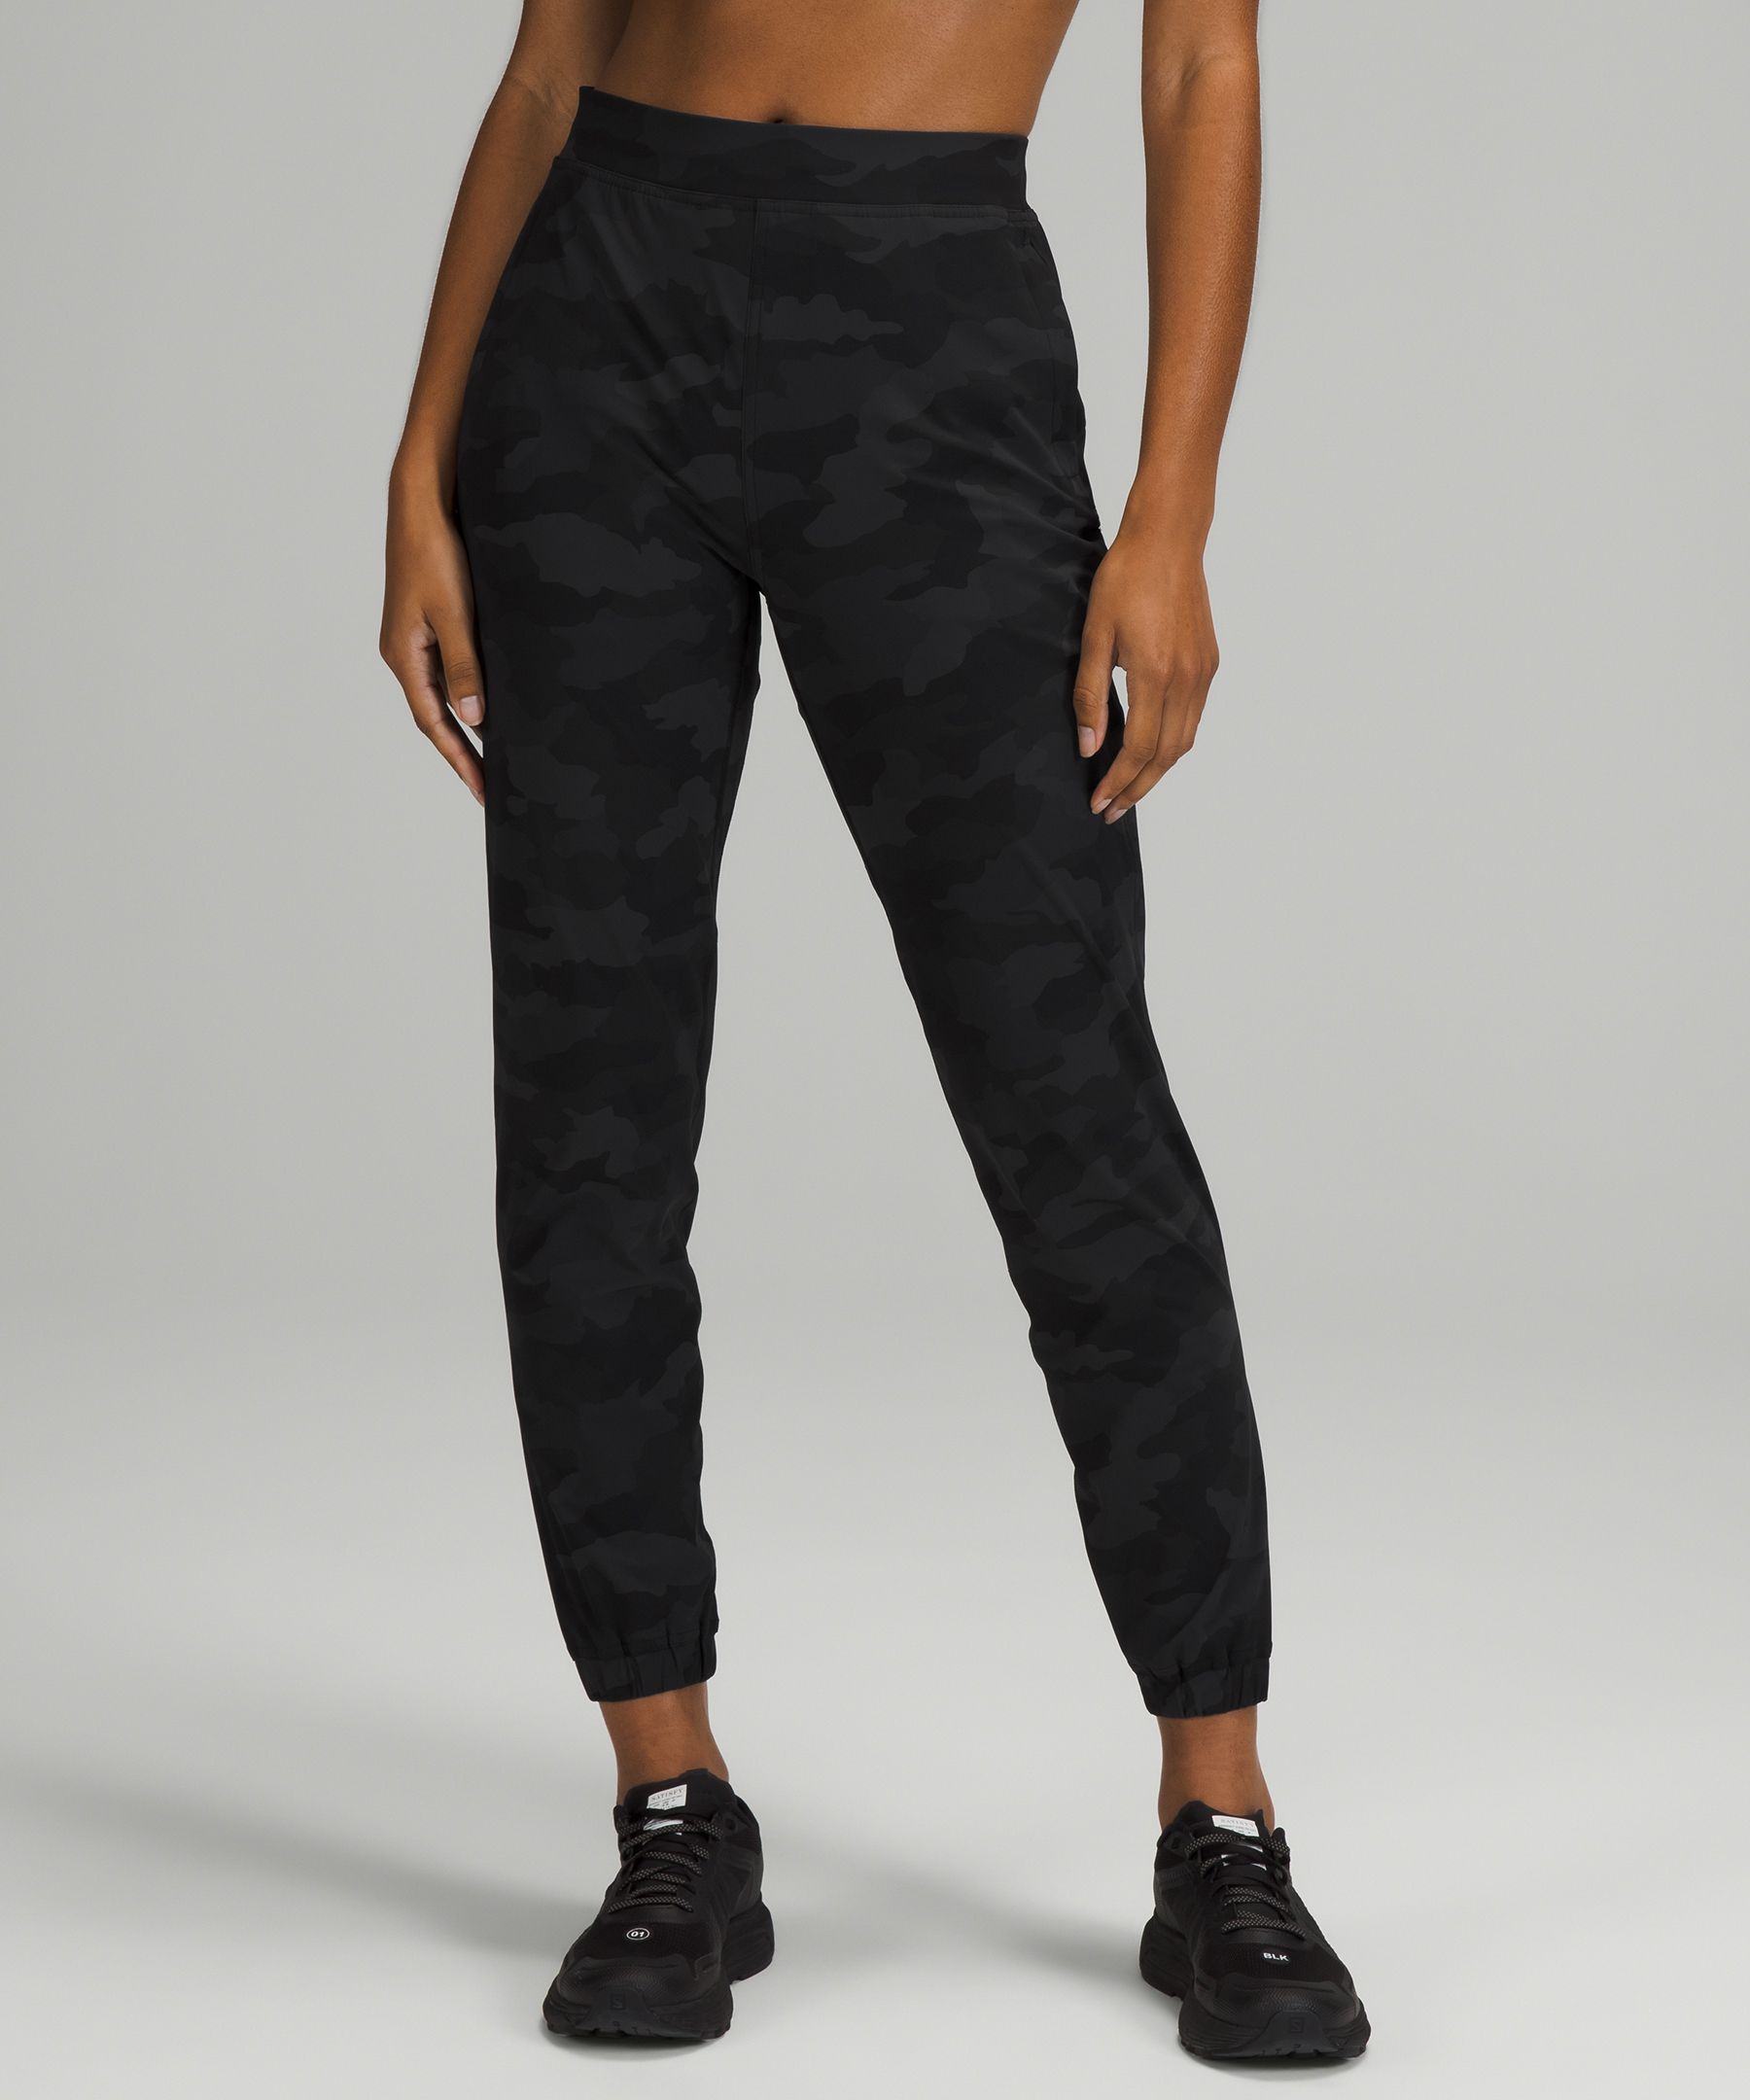 Black Adapted-state water-repellent track pants